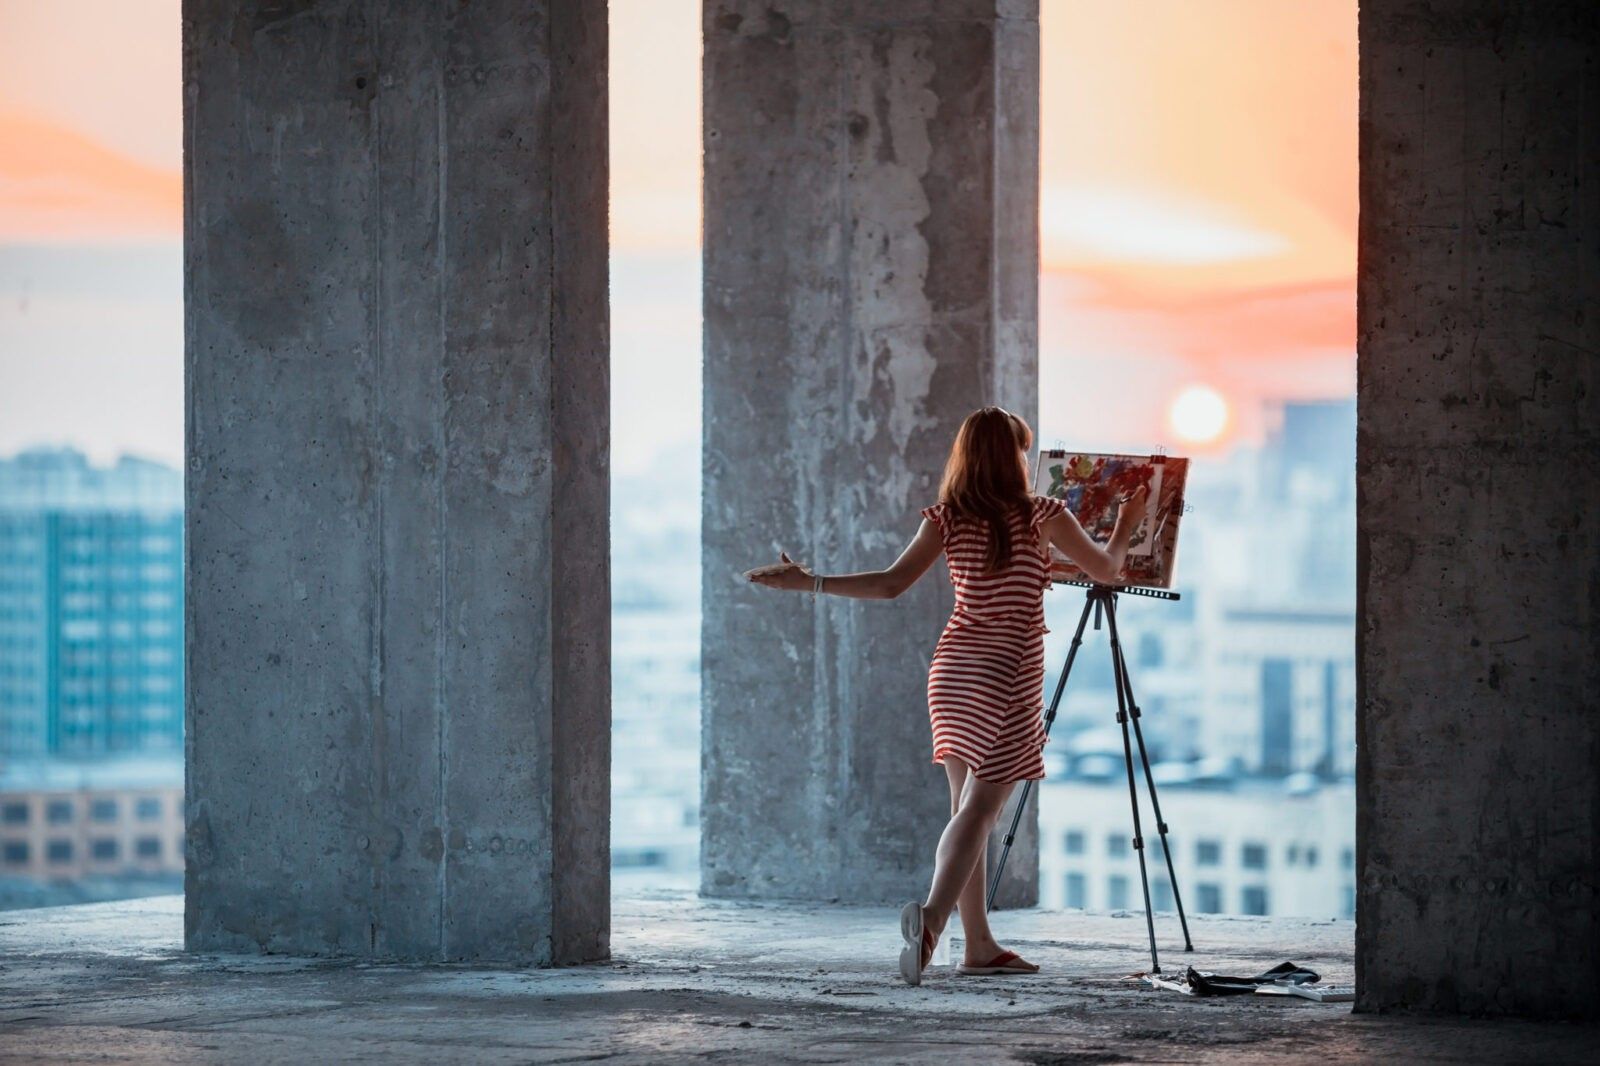 How art healed my life and can enhance yours